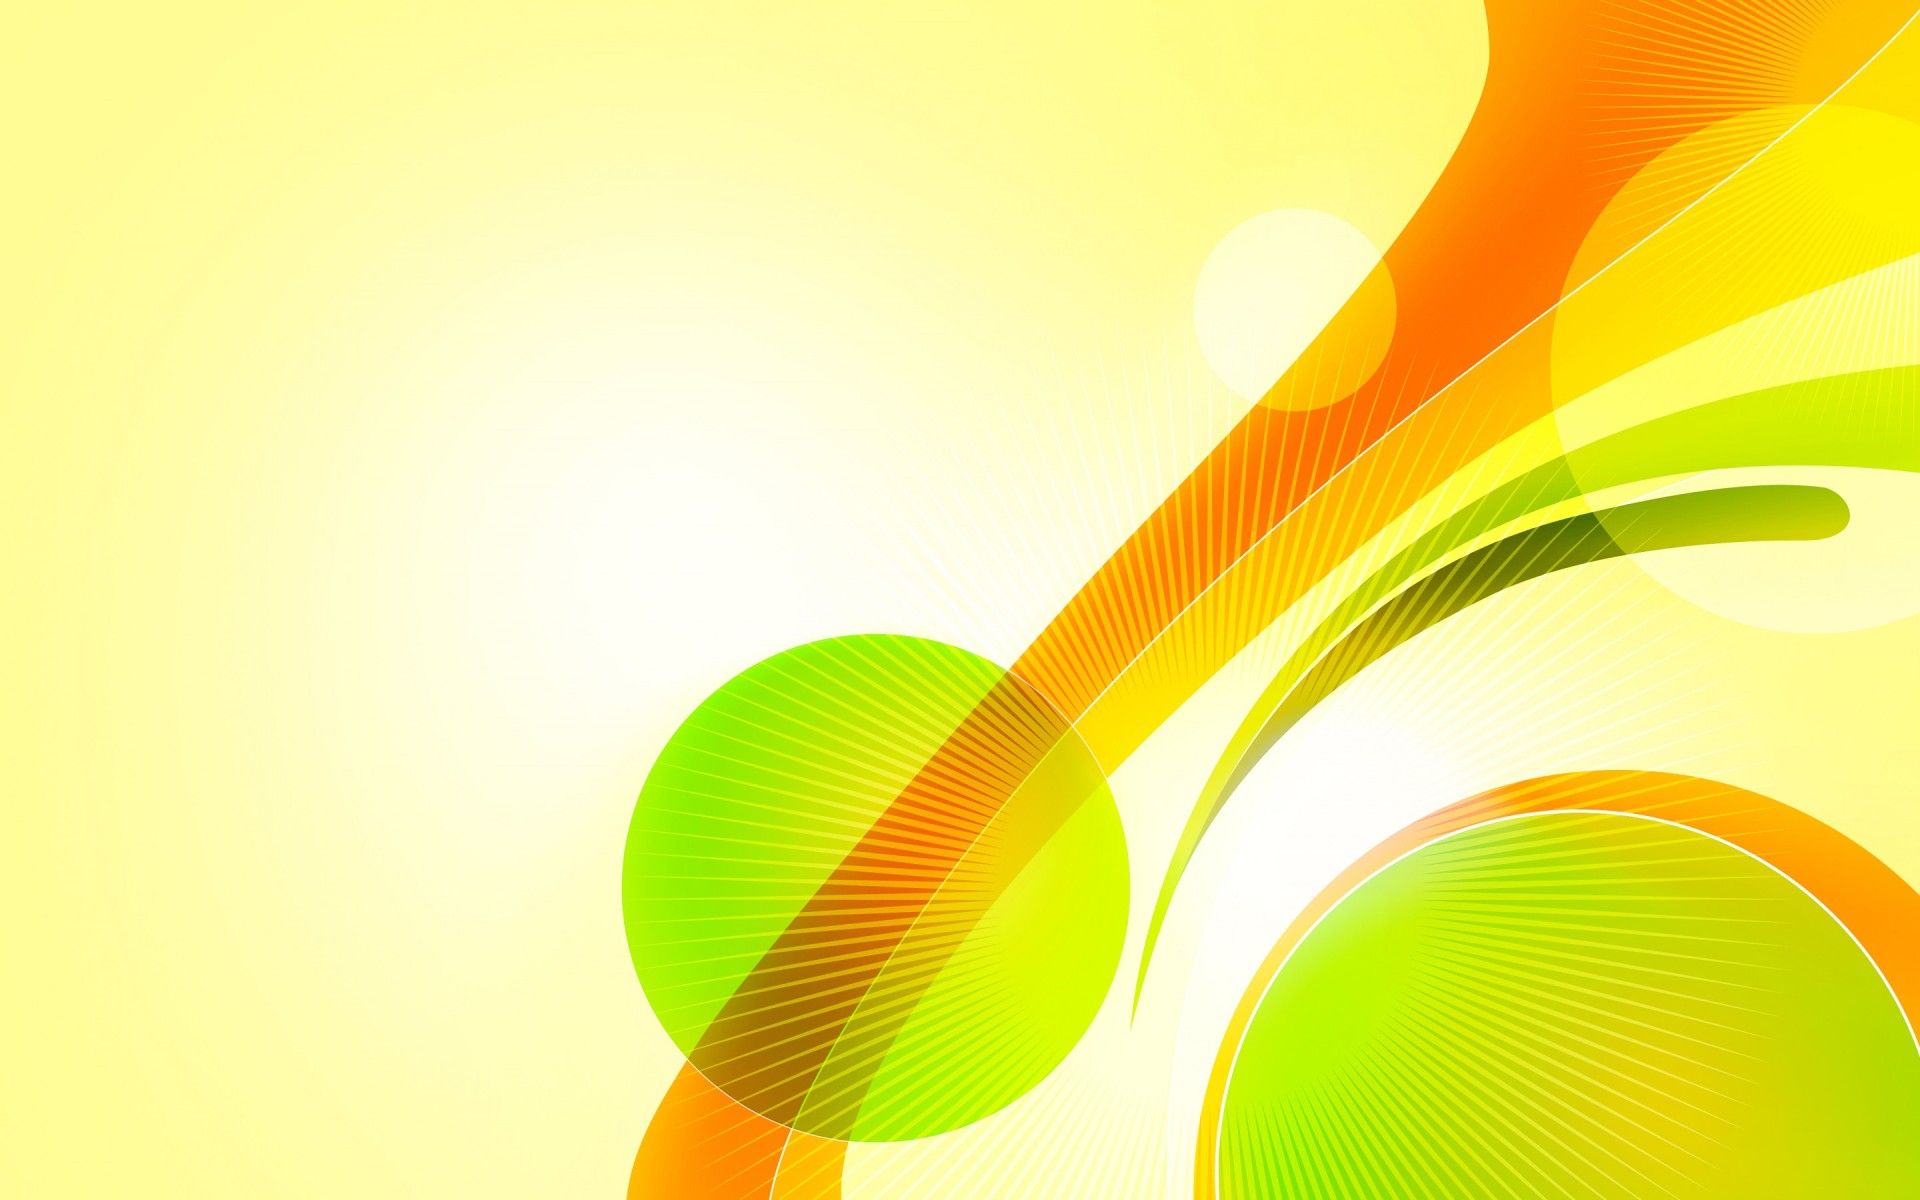 Abstract Design Bright Yellow Green Orange 1920x1200 Wide Wallpaper.net. Miss. Thought Through Solutions For Business People